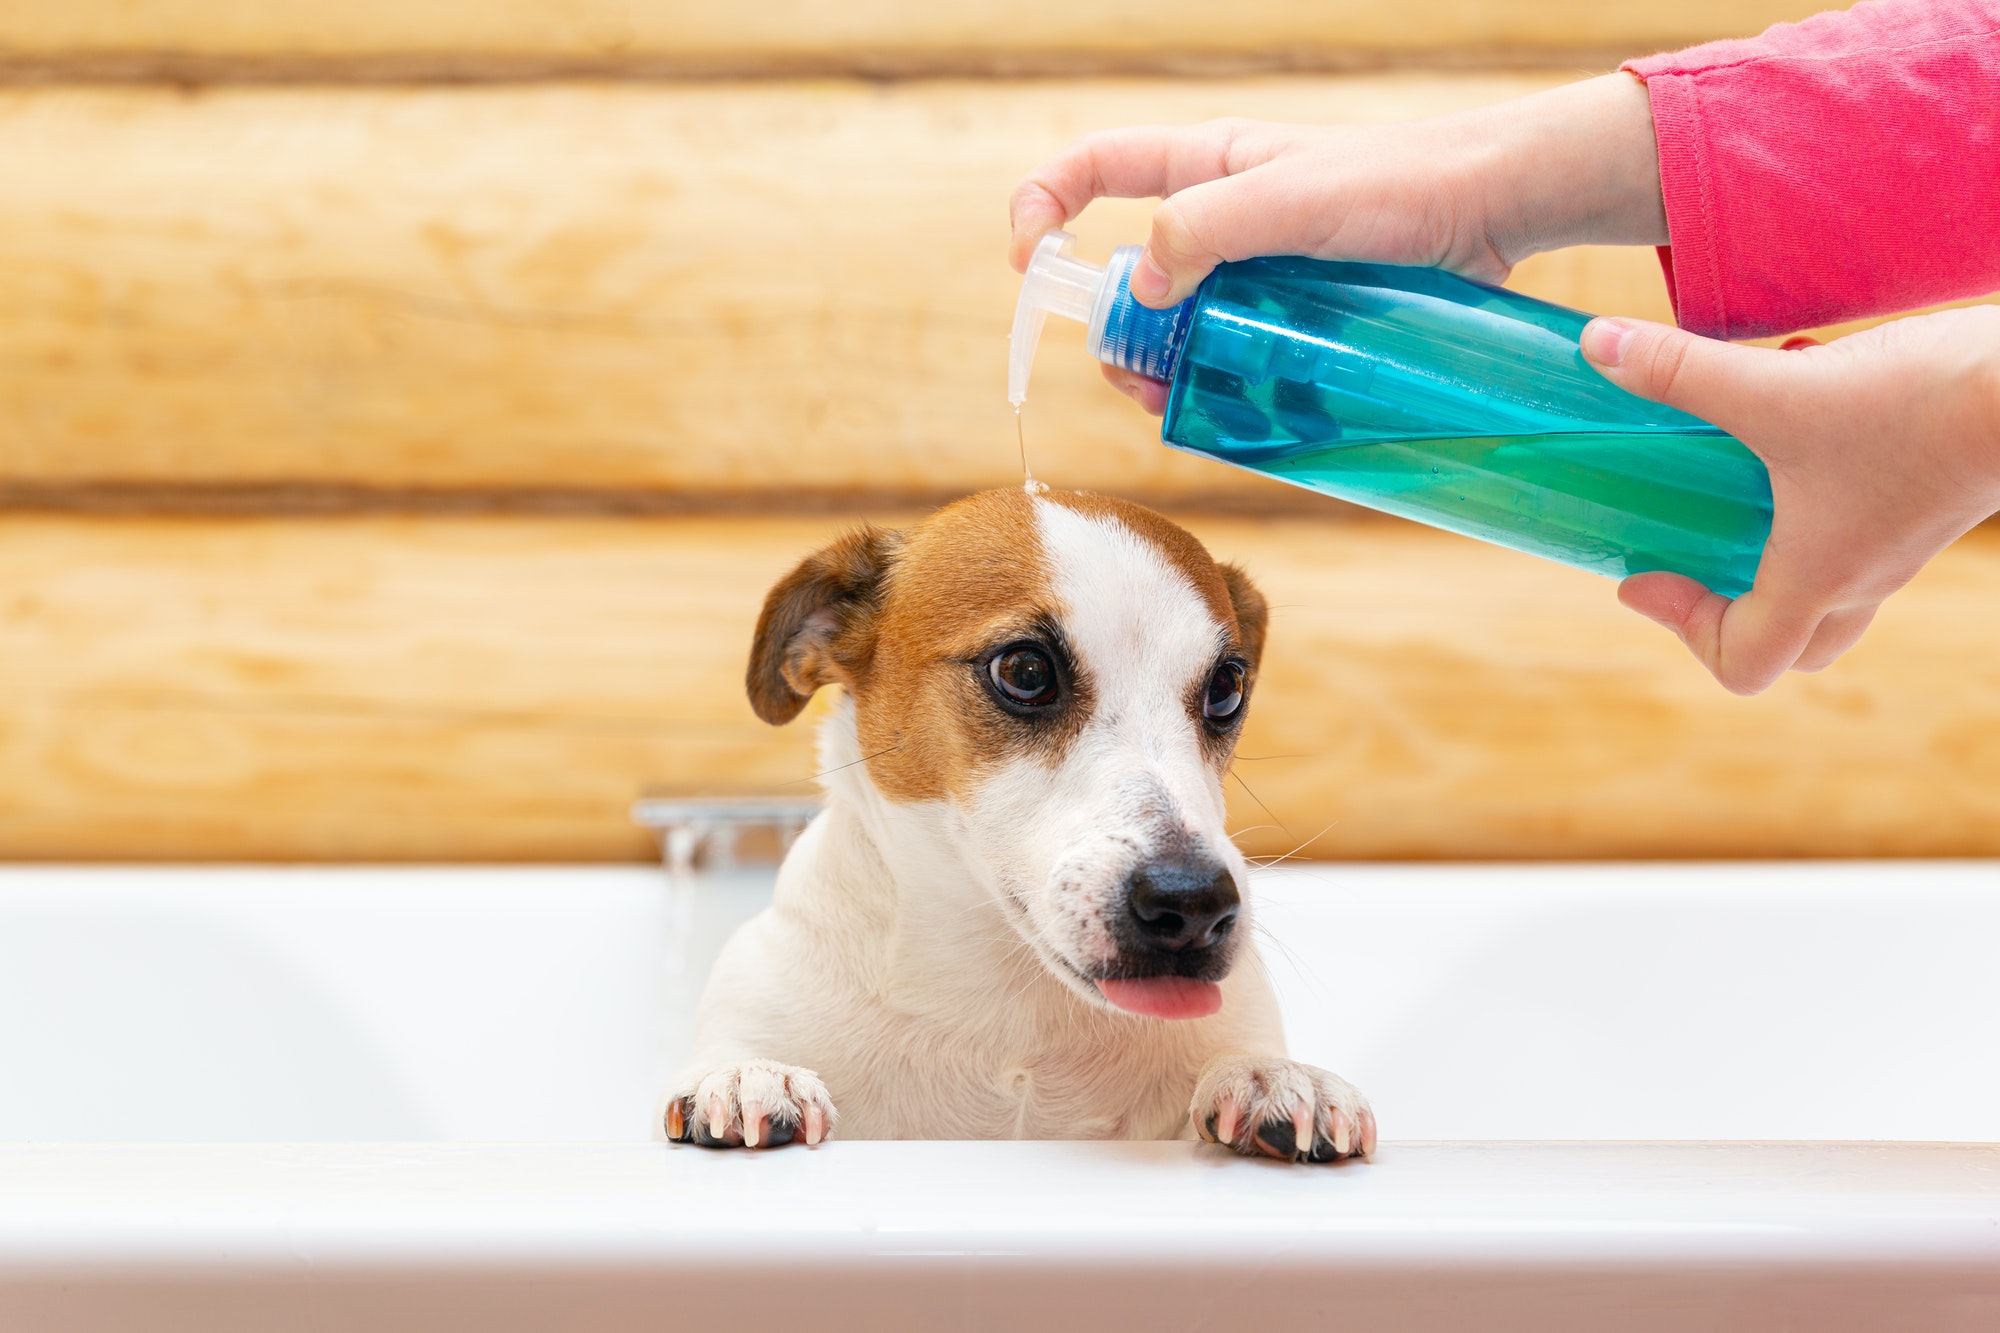 A child washes his dog Jack Russell Terrier with shampoo or soap in the bathroom.